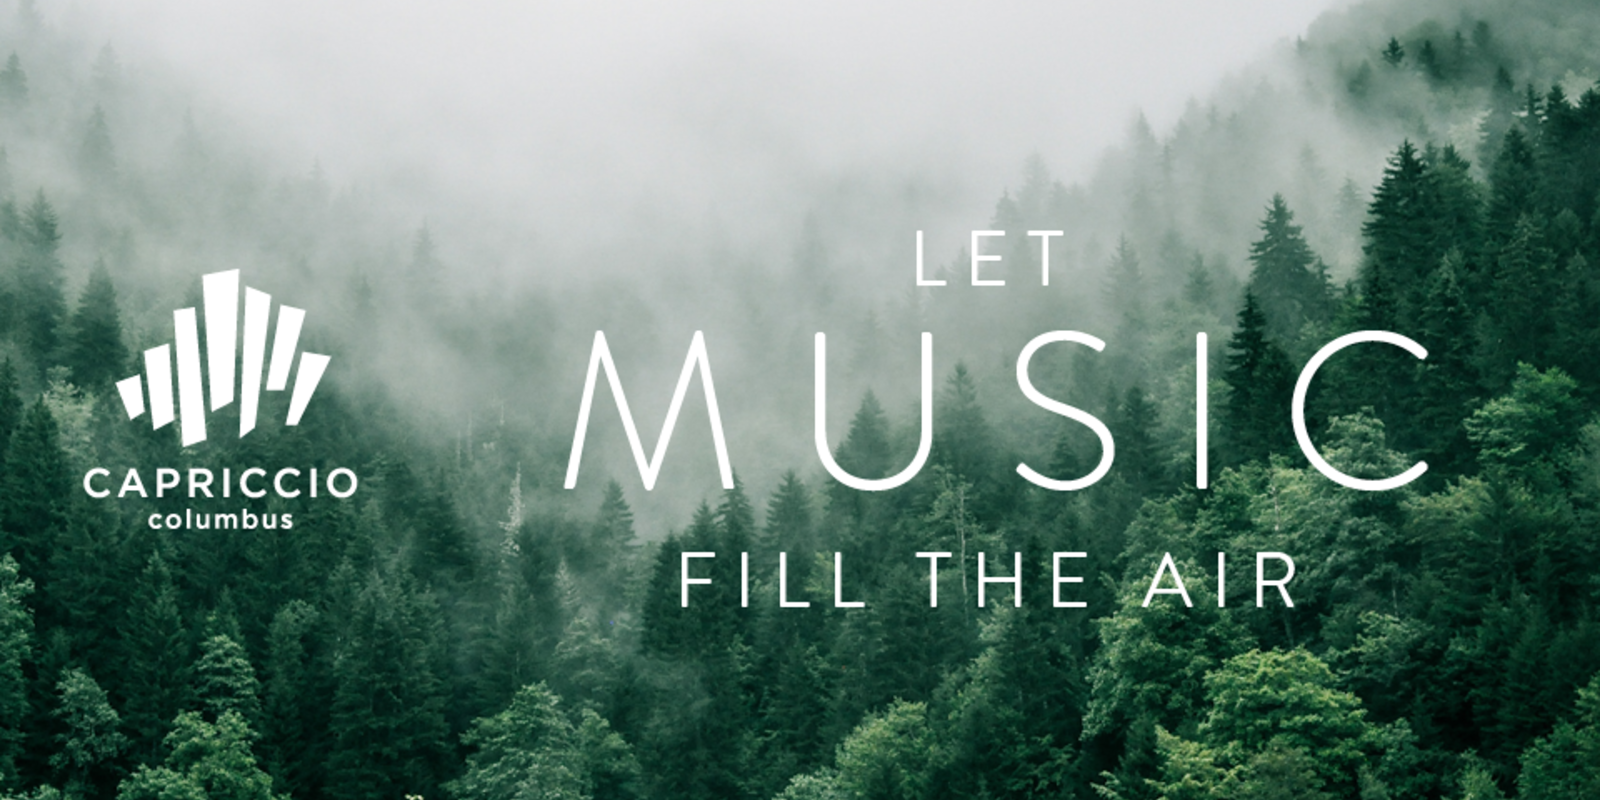 Let Music Fill the Air!